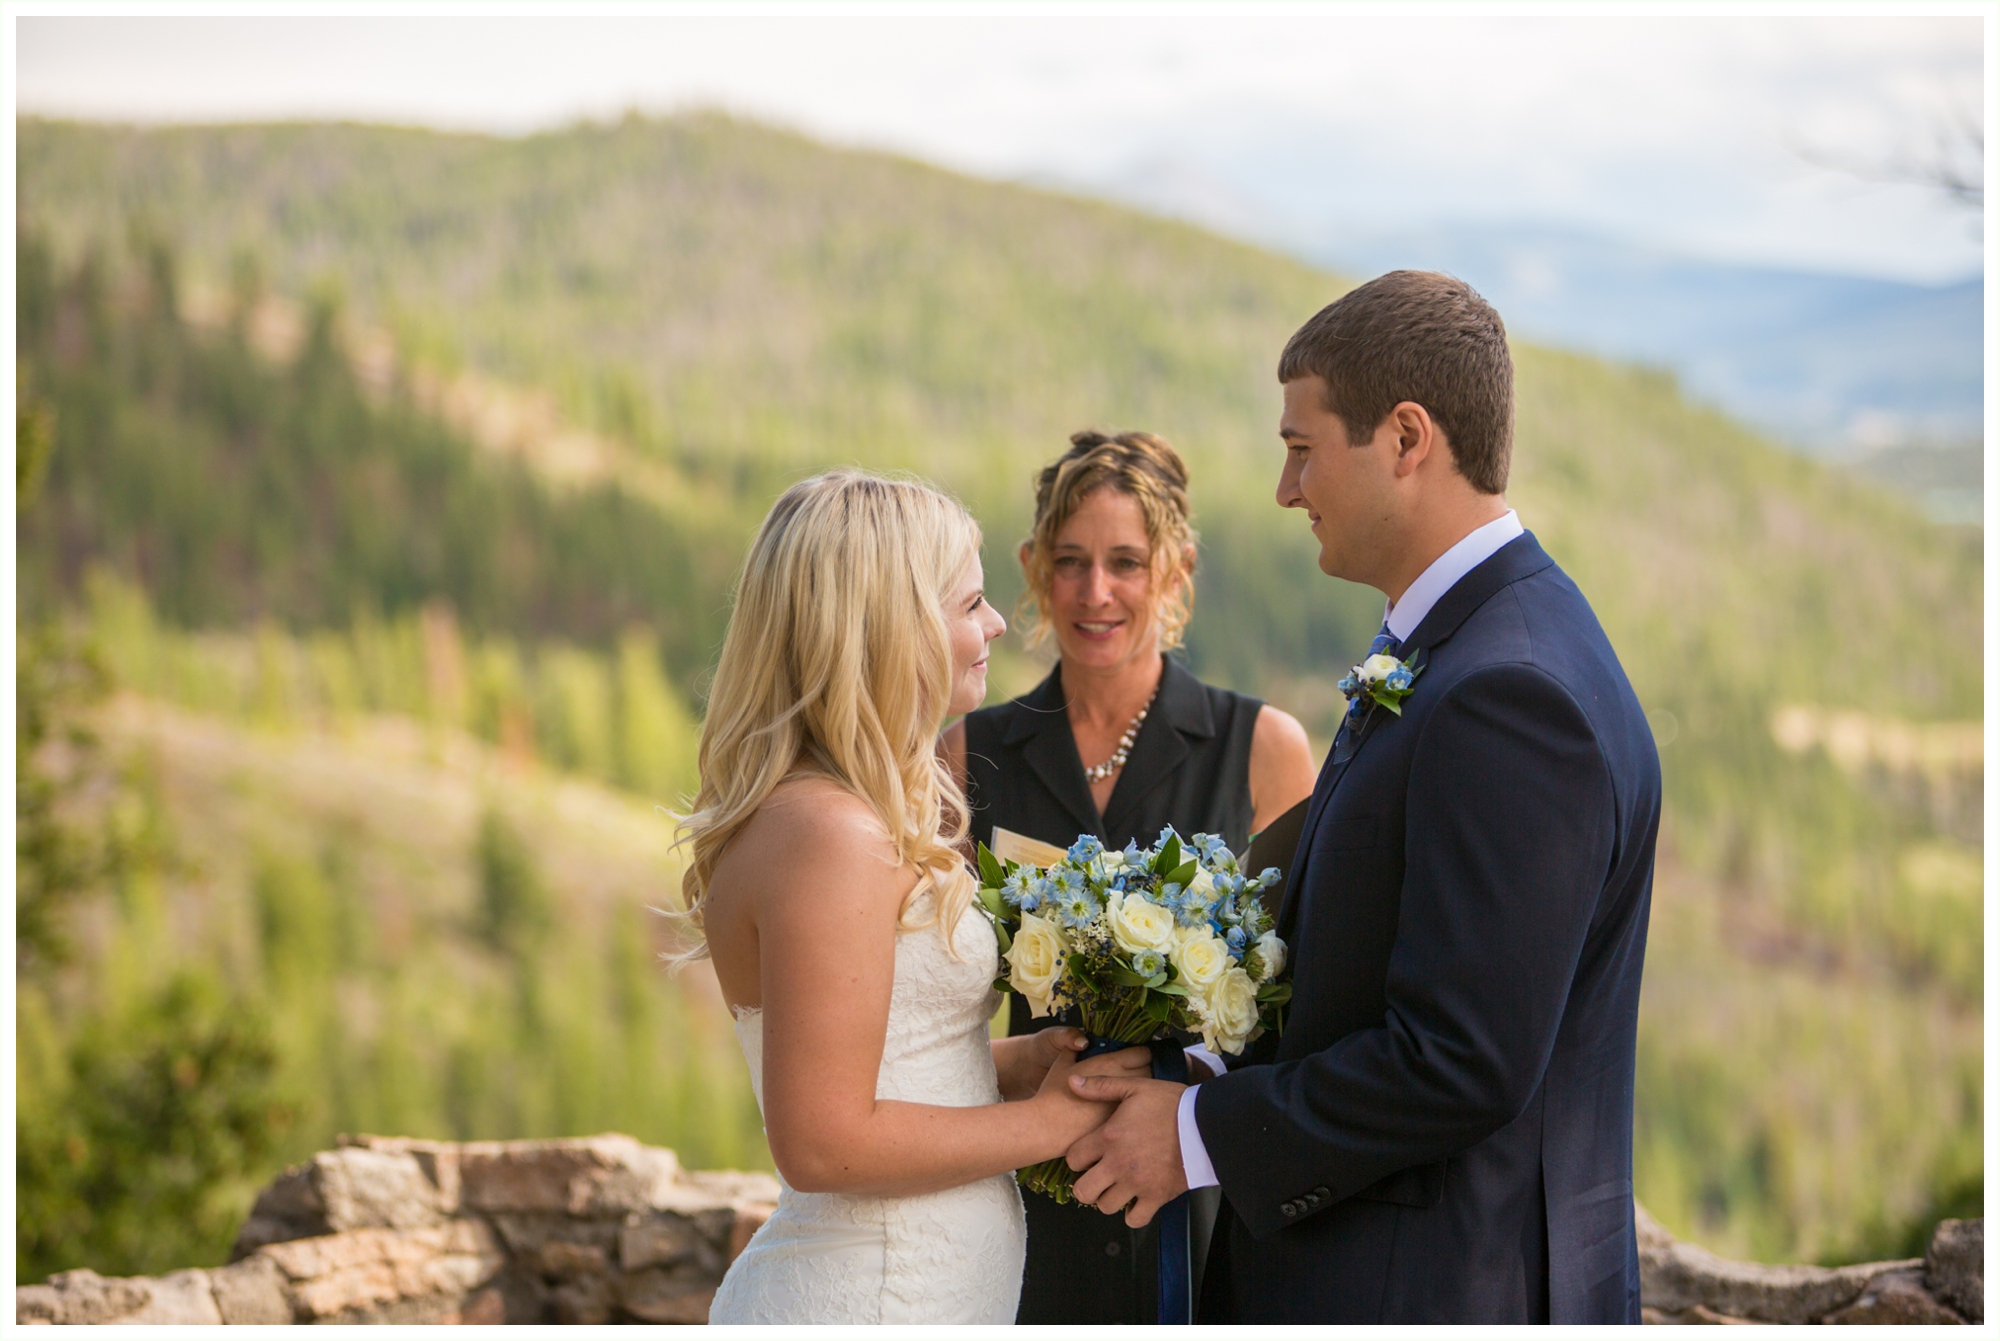 sapphire point overlook wedding ceremony at lake dillon colorado candid bride groom moment